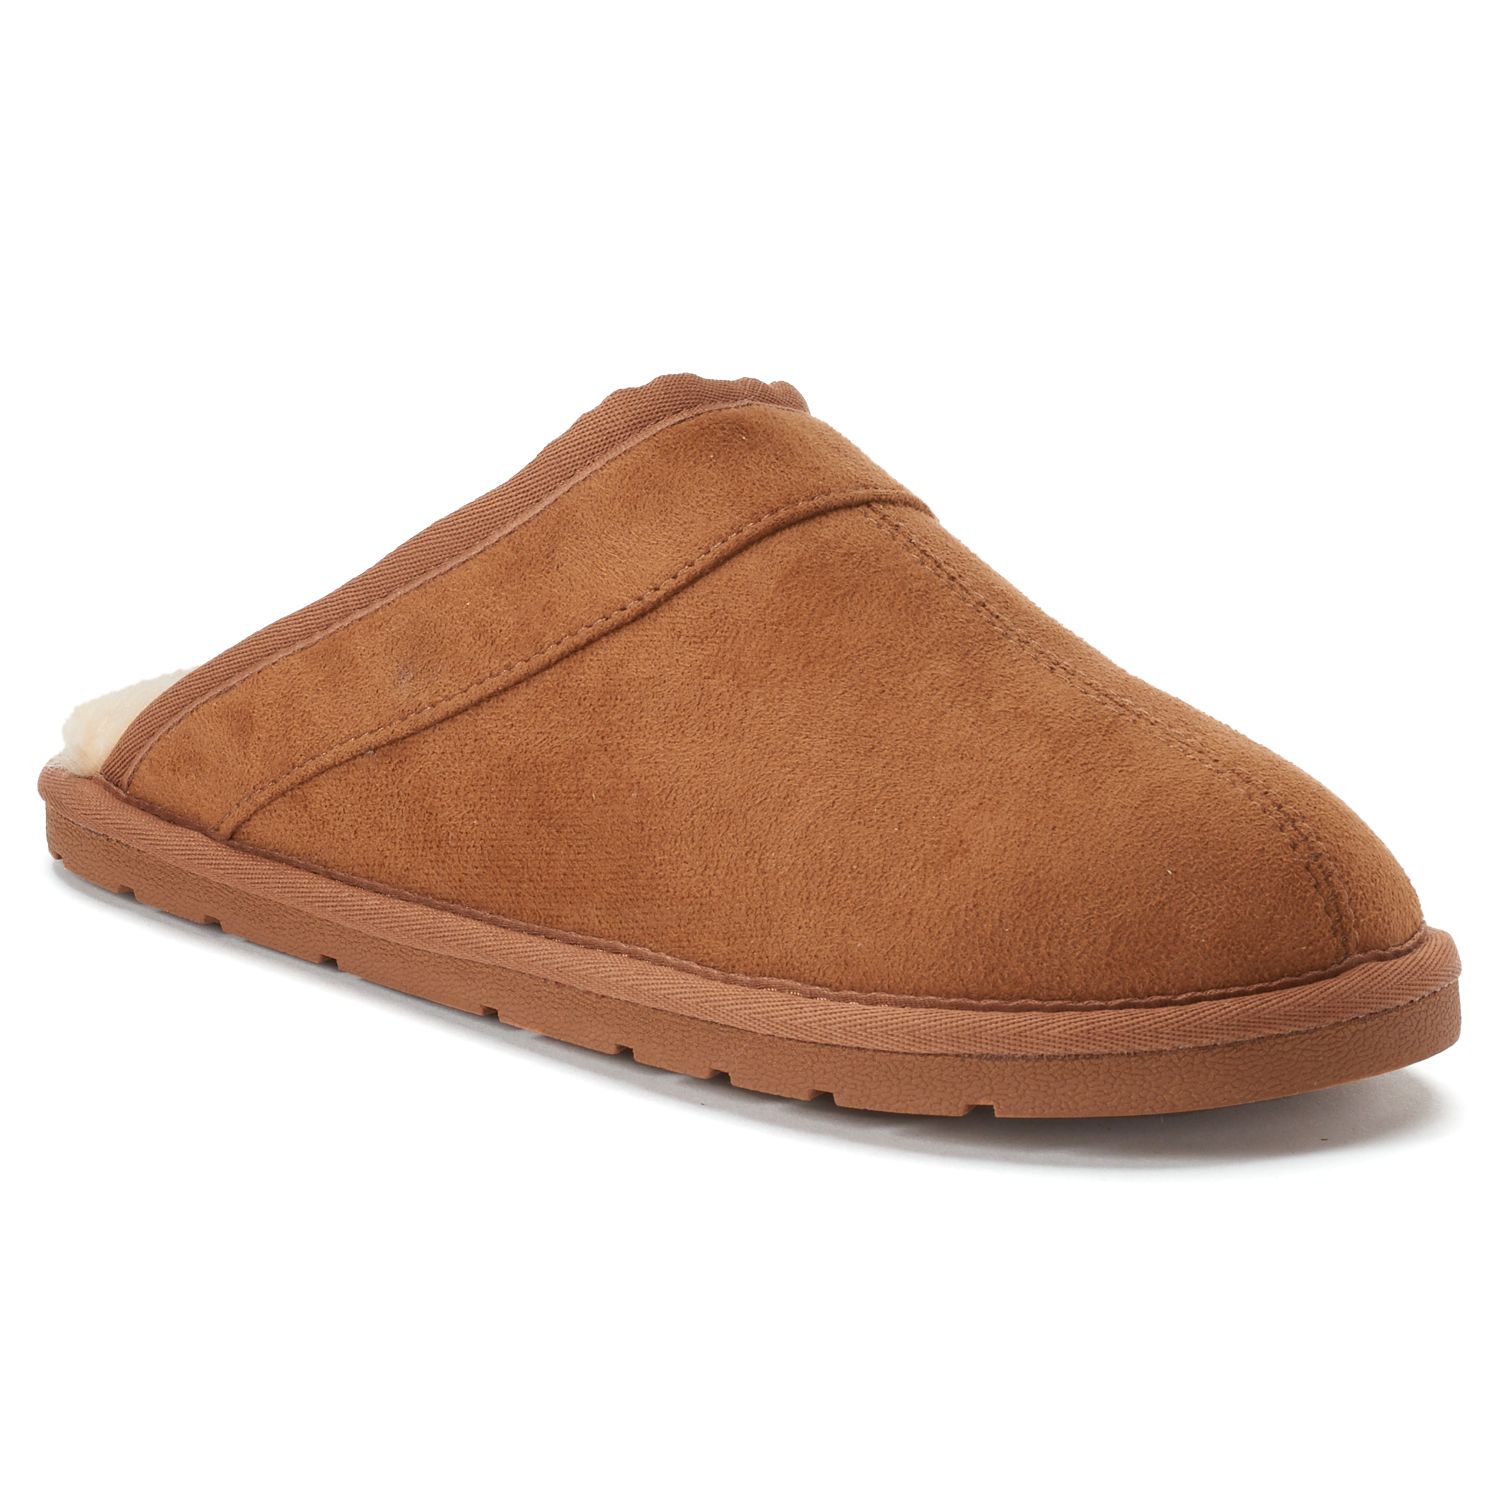 chaps mens slippers